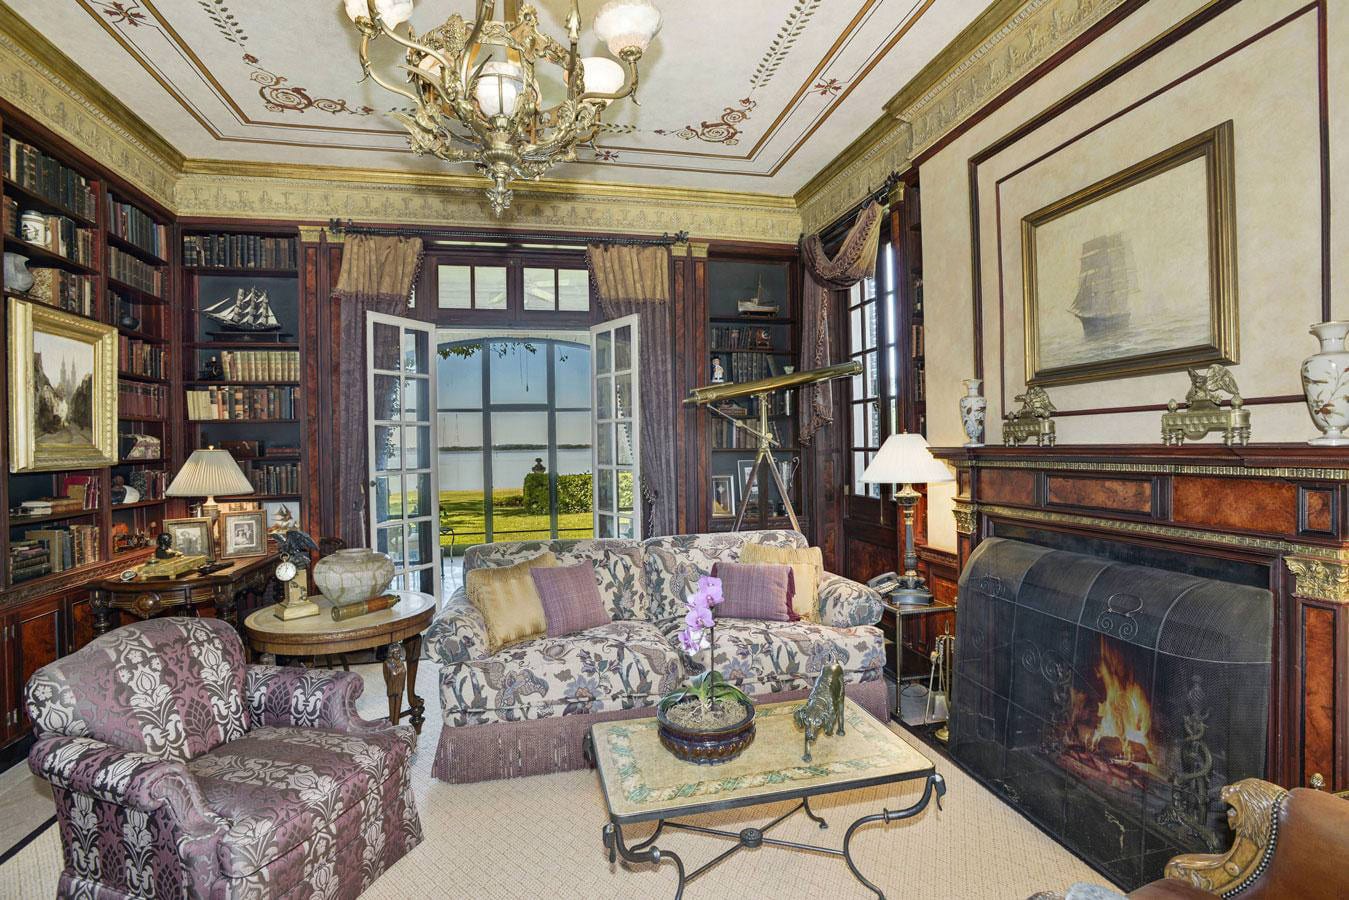 1800 Holly Beach Farm Road - Interior of Mansion Library and Office